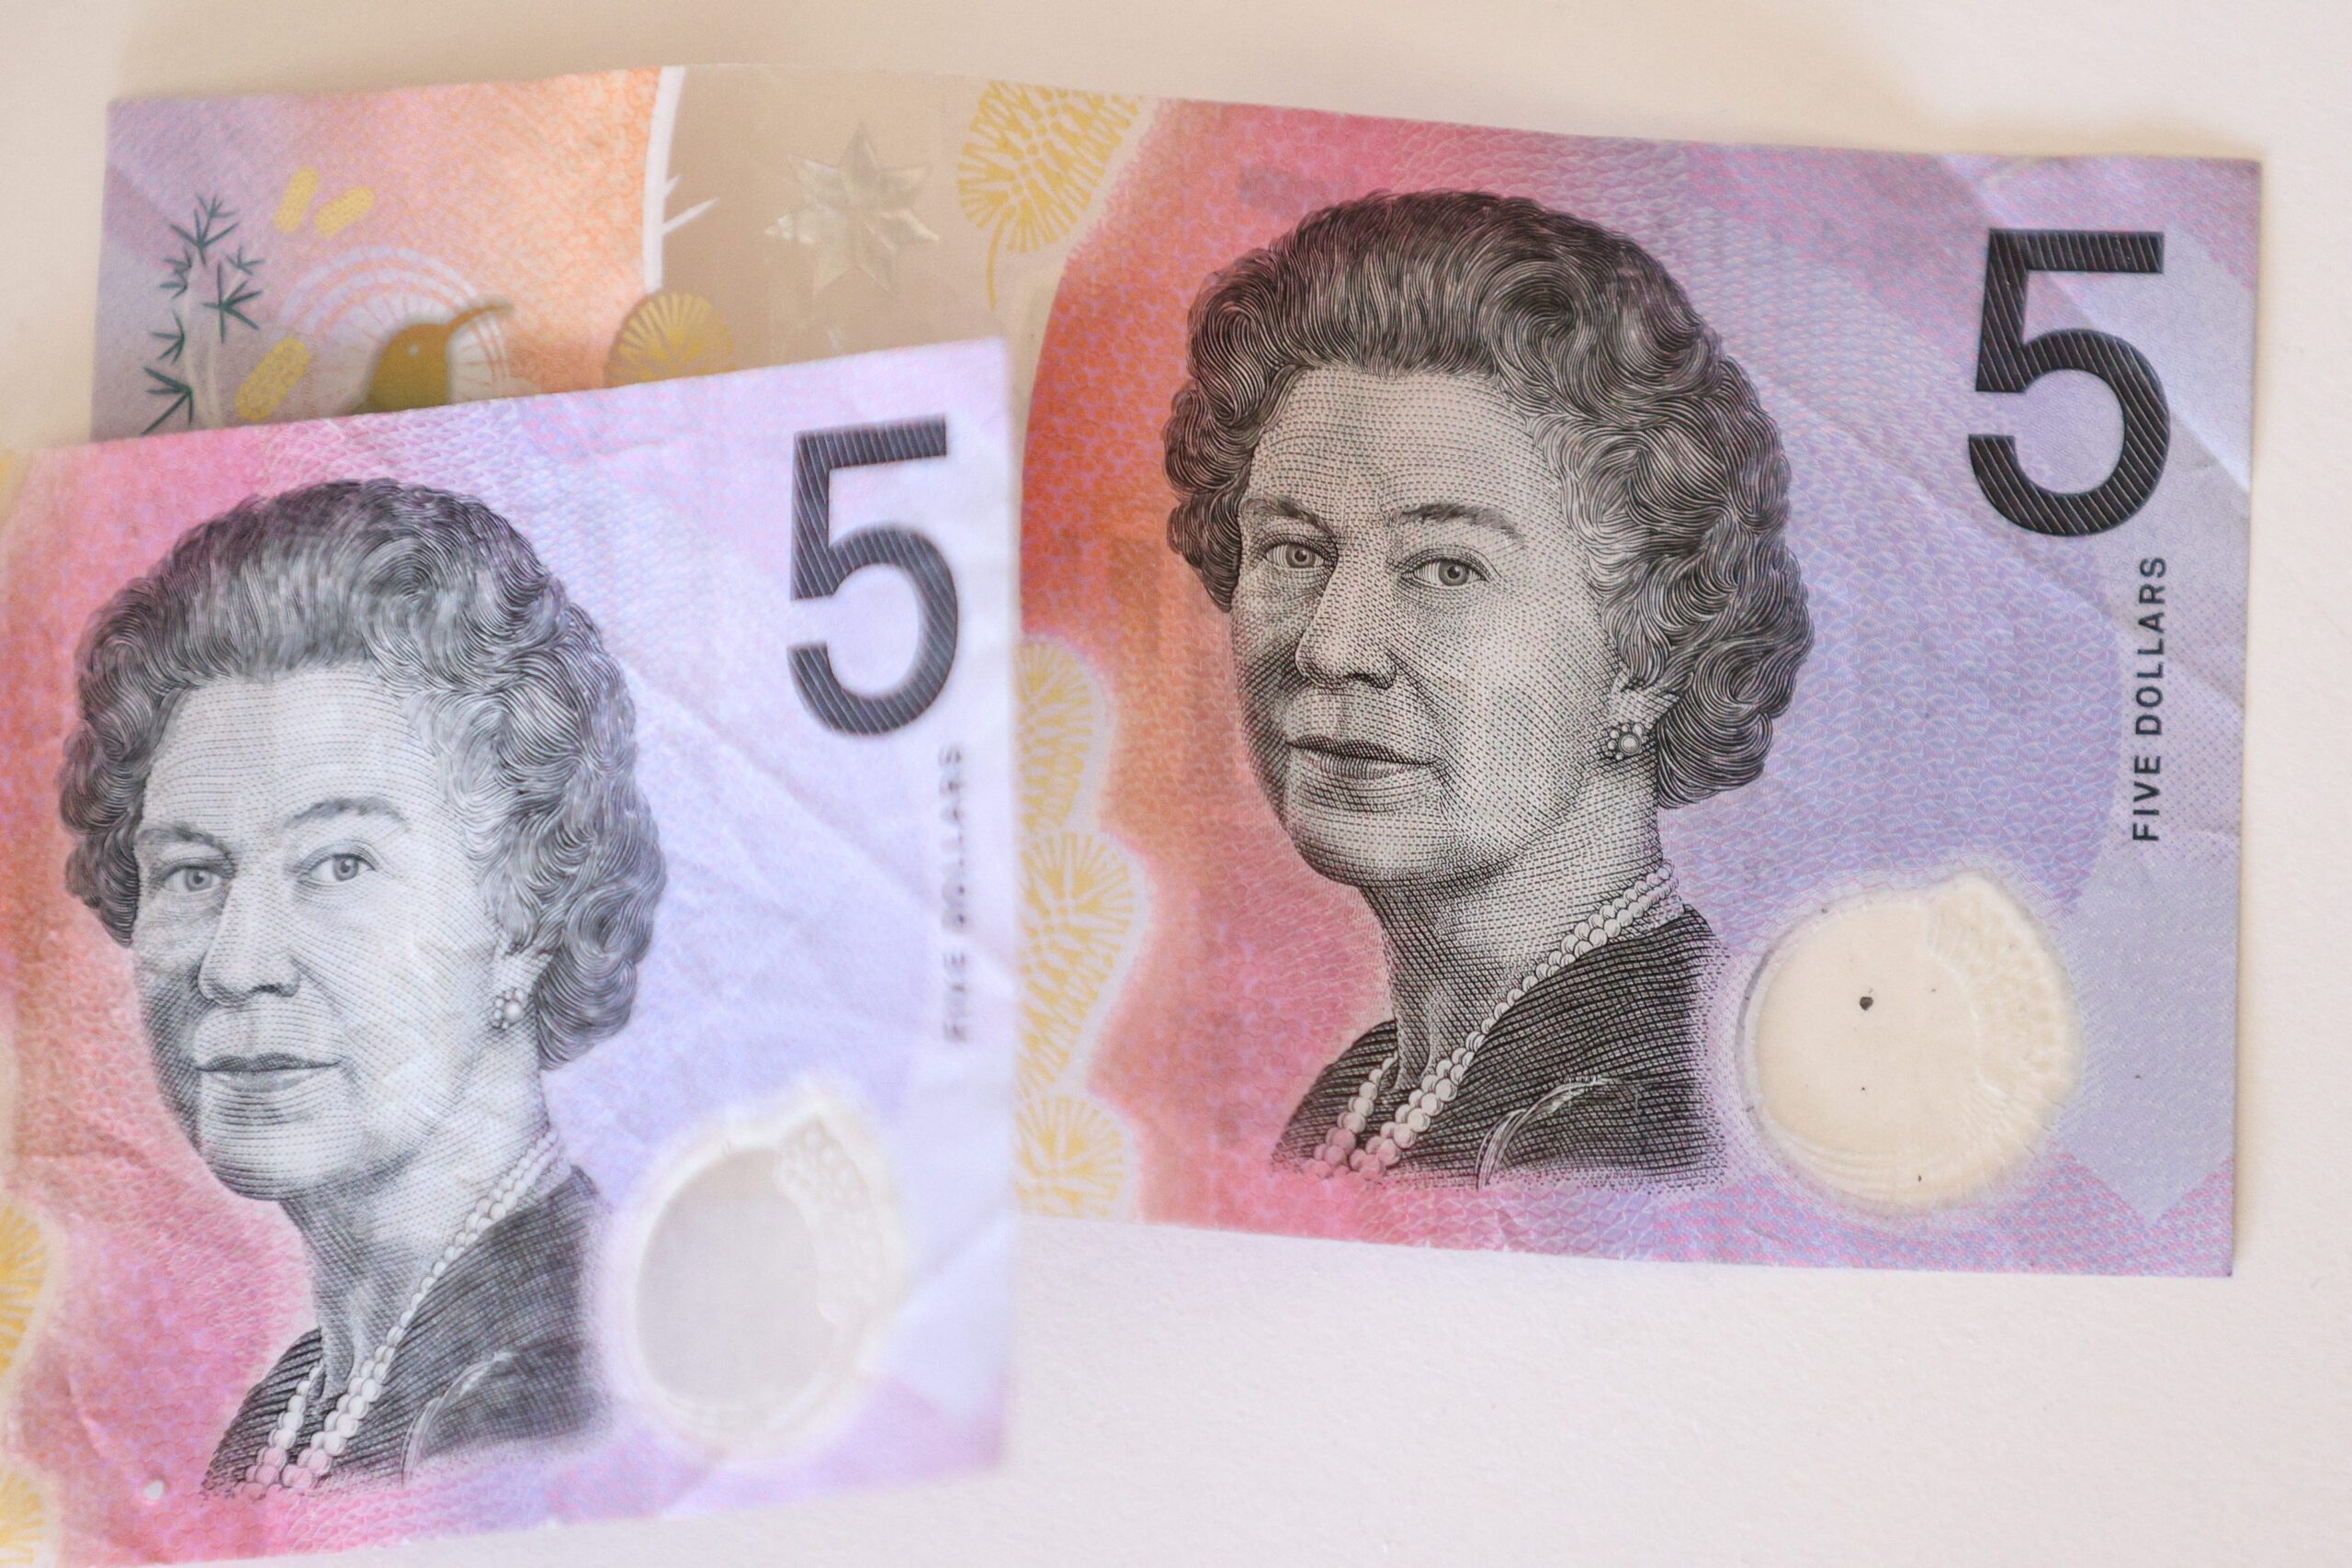 Australia to replace monarch on banknote with design honoring indigenous culture